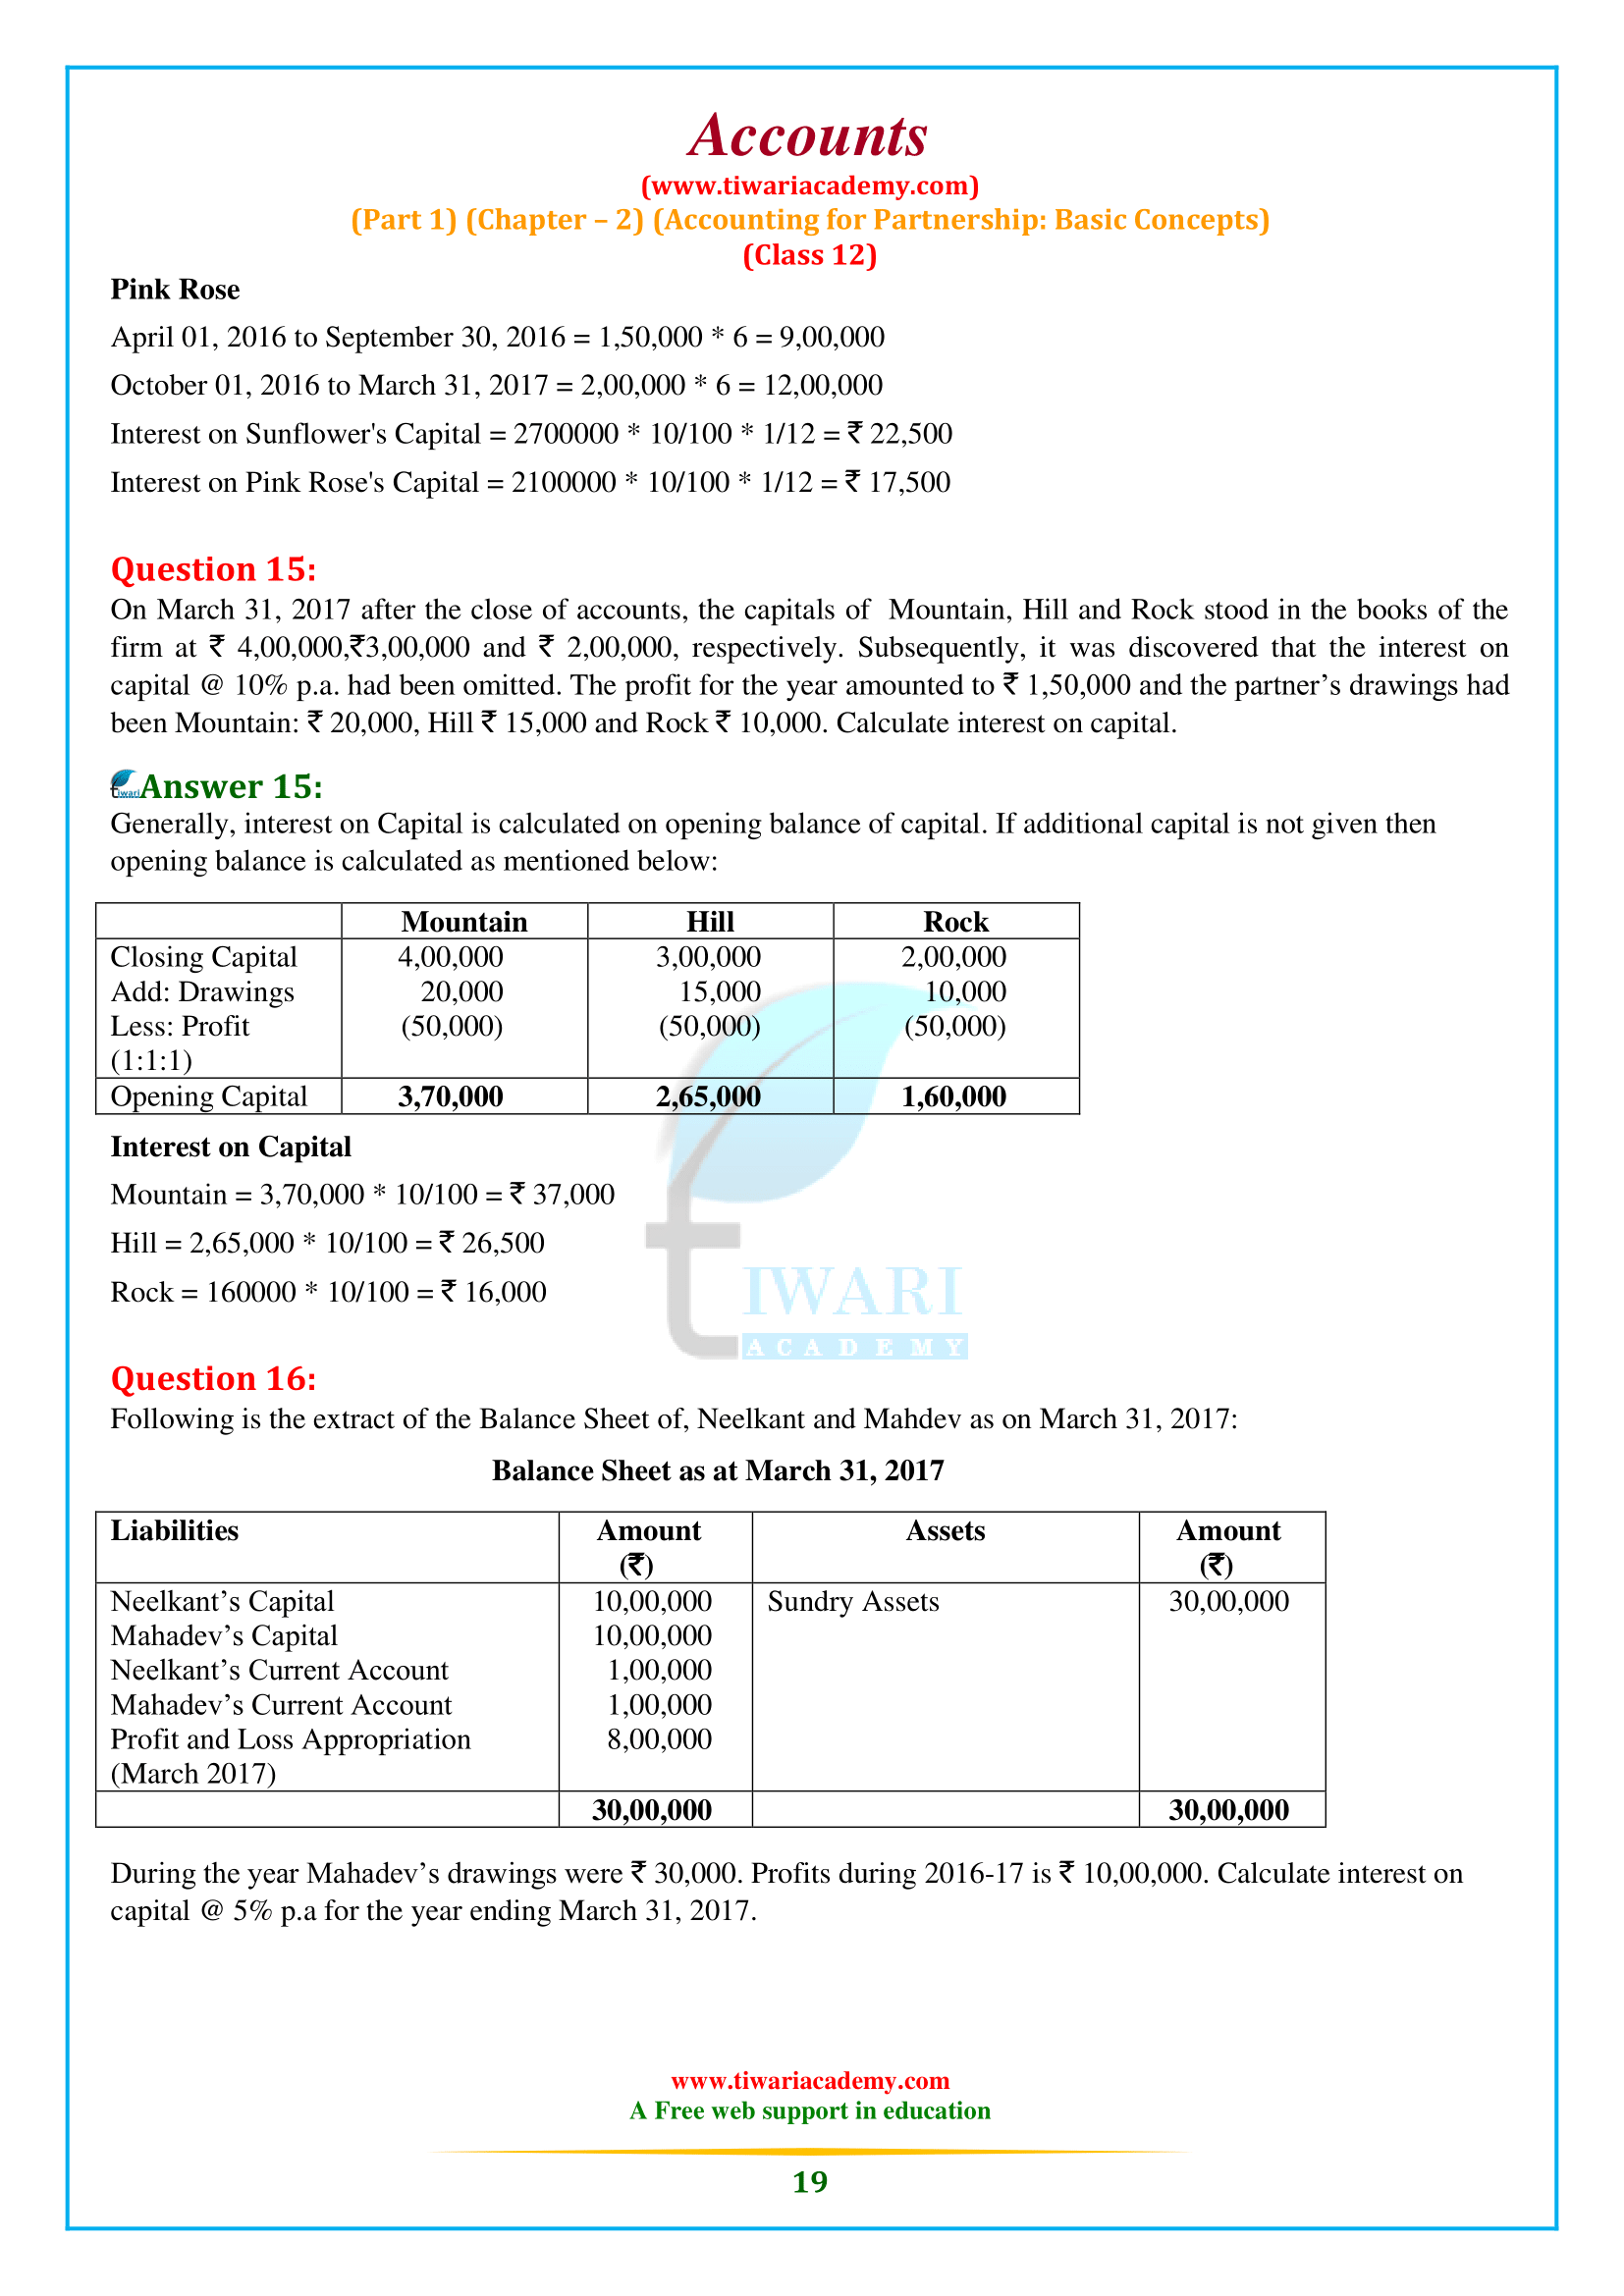 Class 12 Accountancy Chapter 2 study only